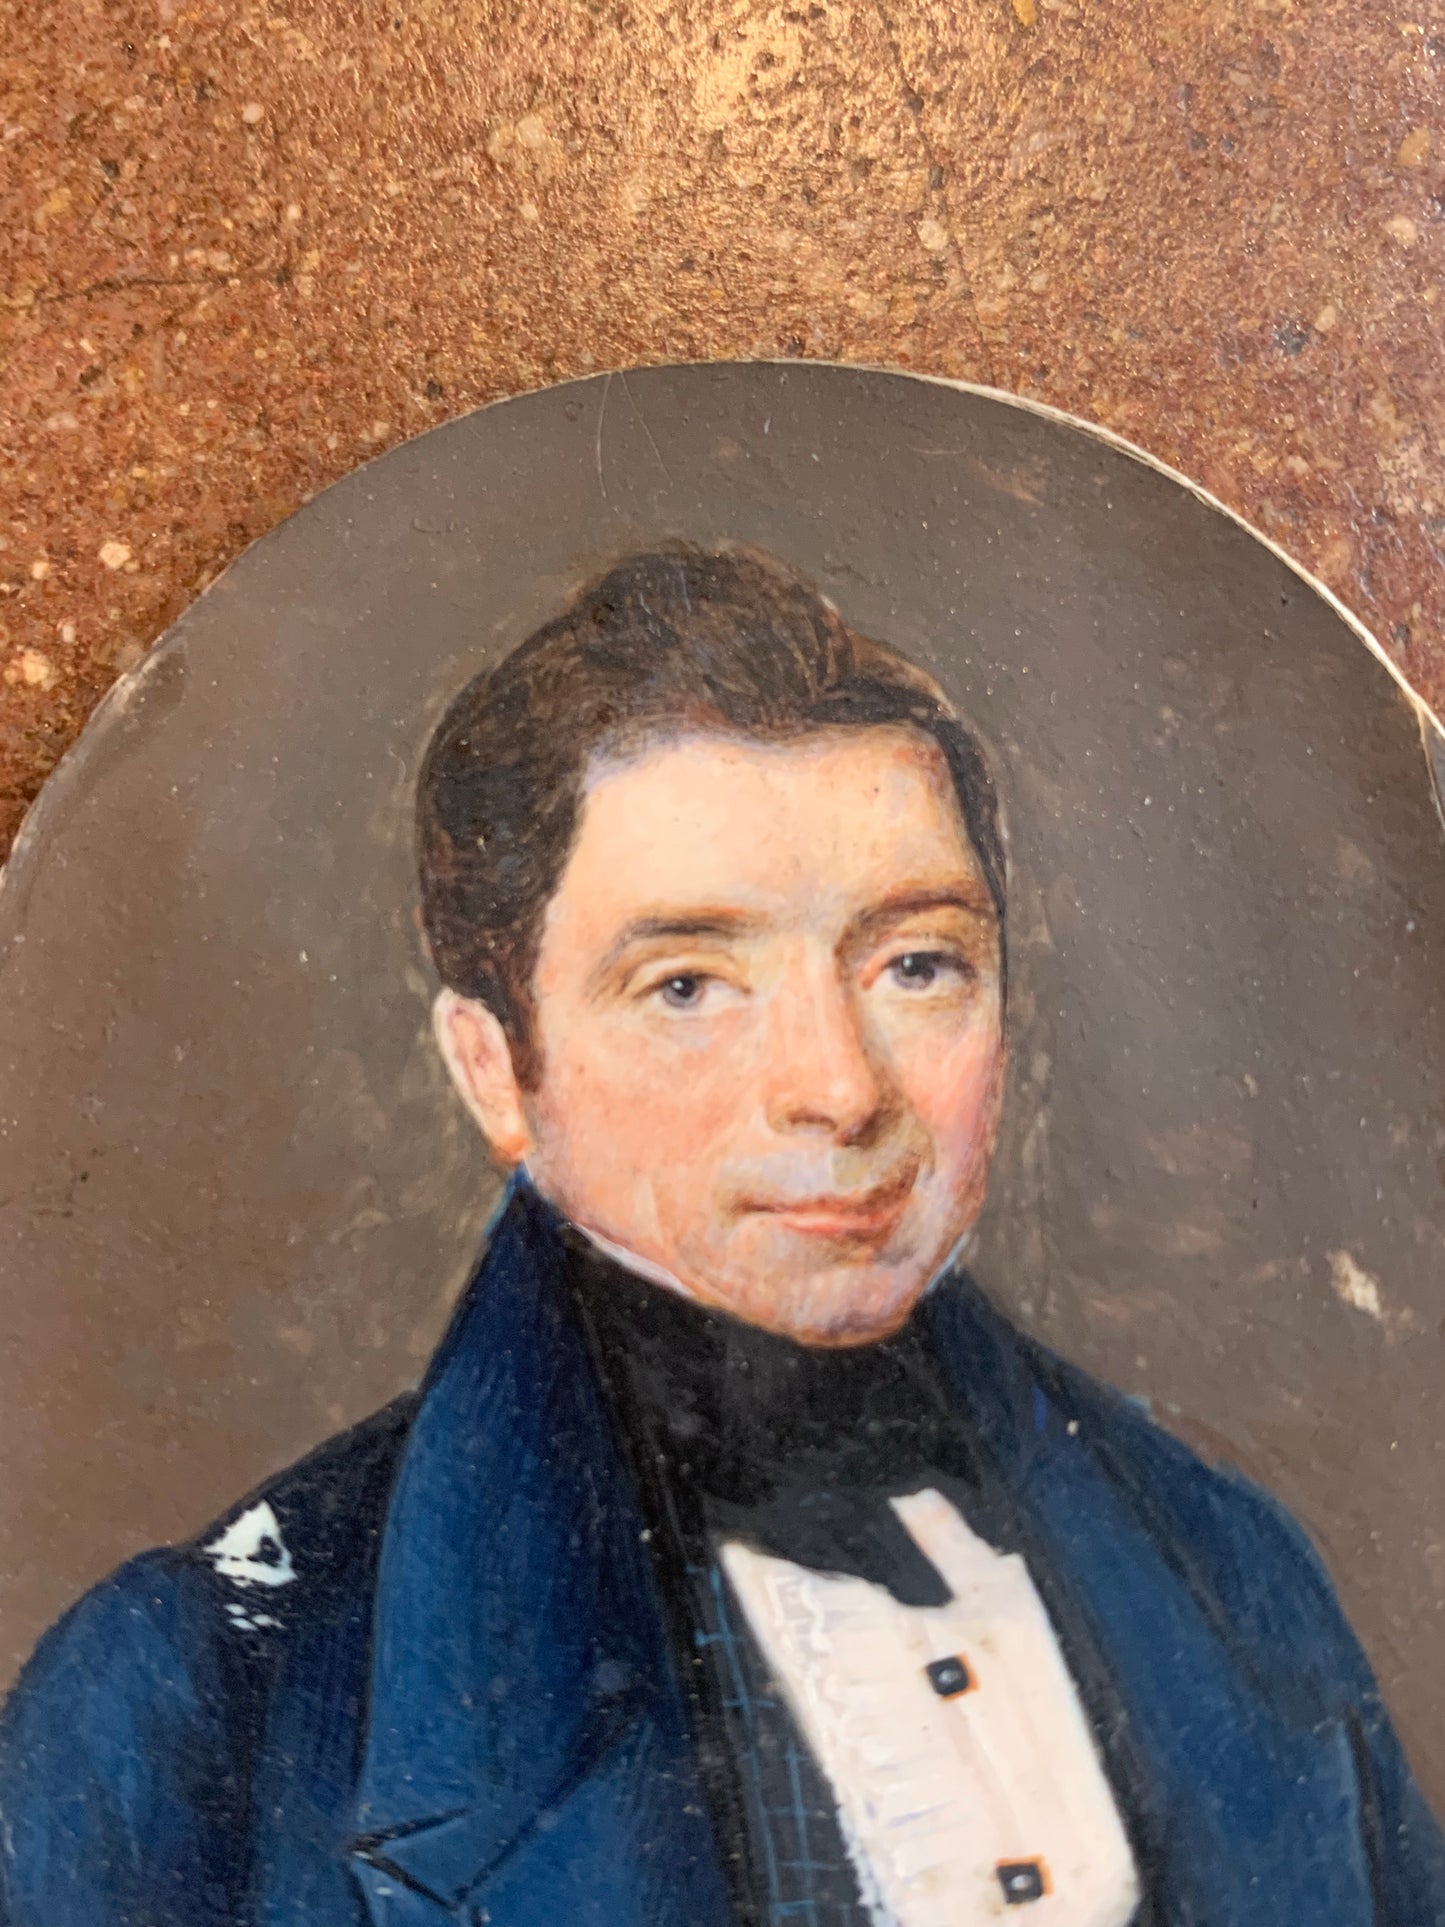 A miniature portrait of an elegant man in a black tie and pleated shirt with jewel buttons, dated 1833.